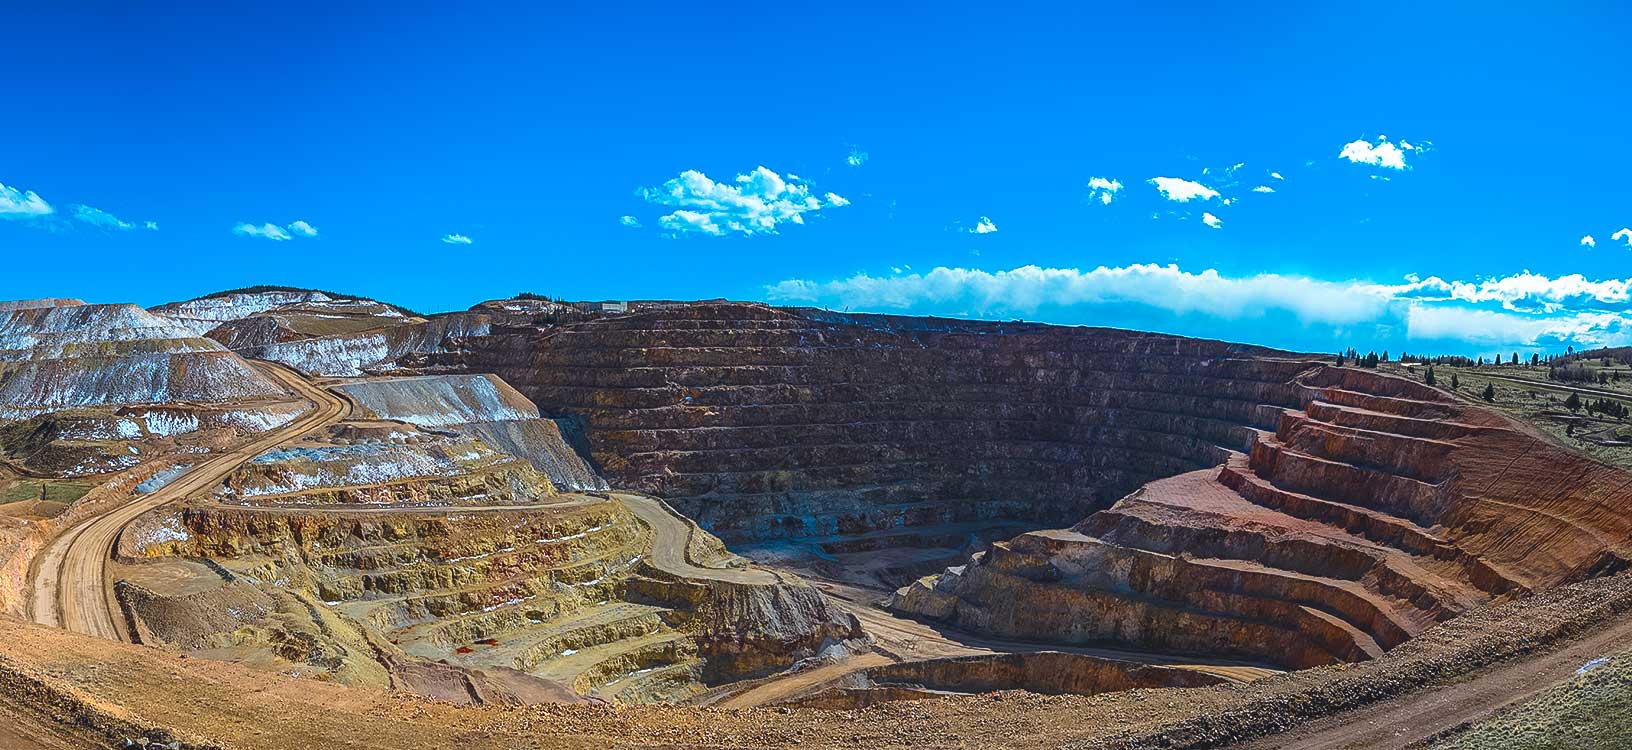 wide view of open pit mine under blue skies